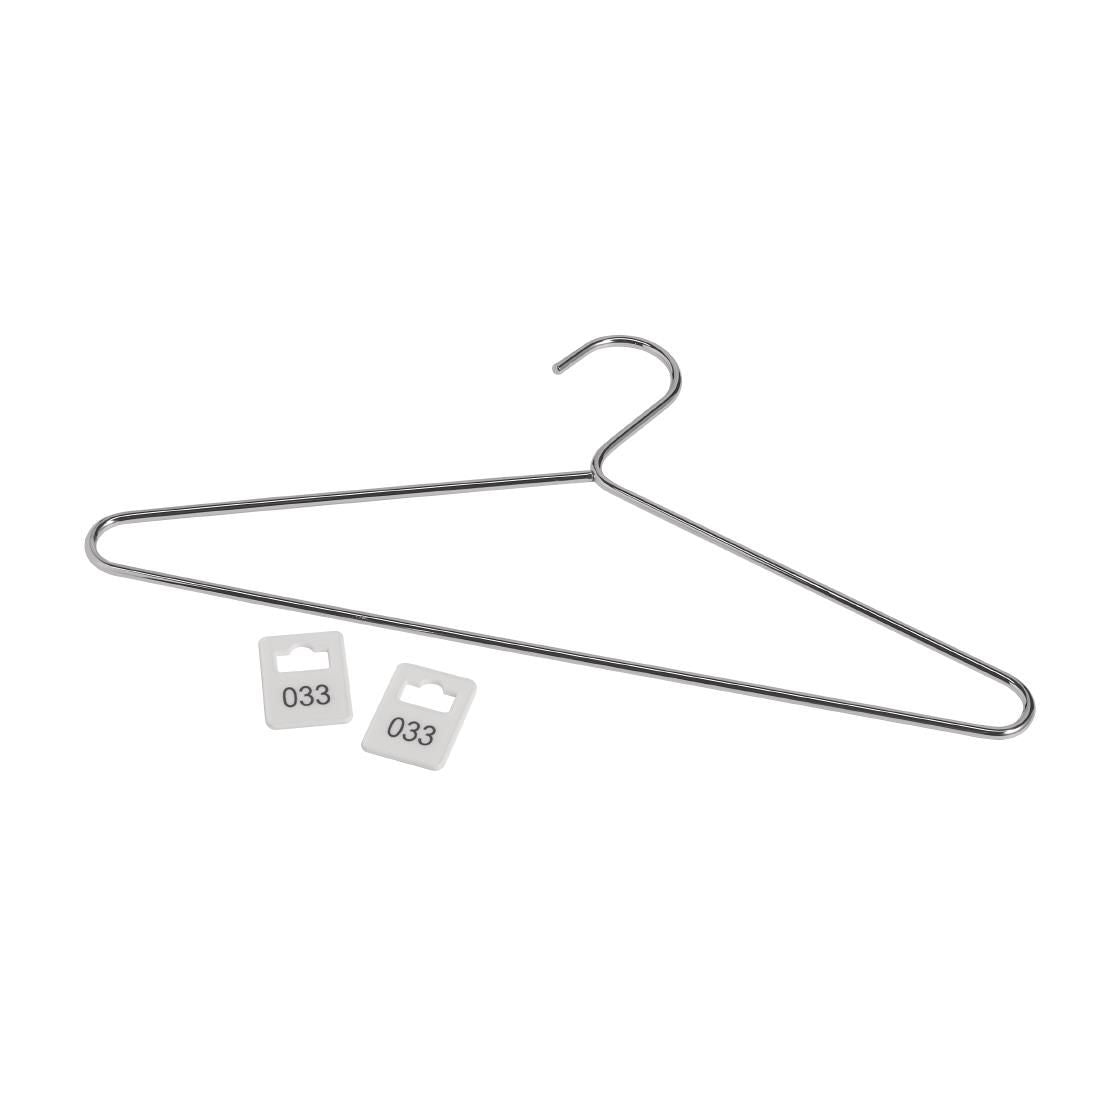 Chrome Plated Steel Hangers with Tags (Pack of 50) JD Catering Equipment Solutions Ltd